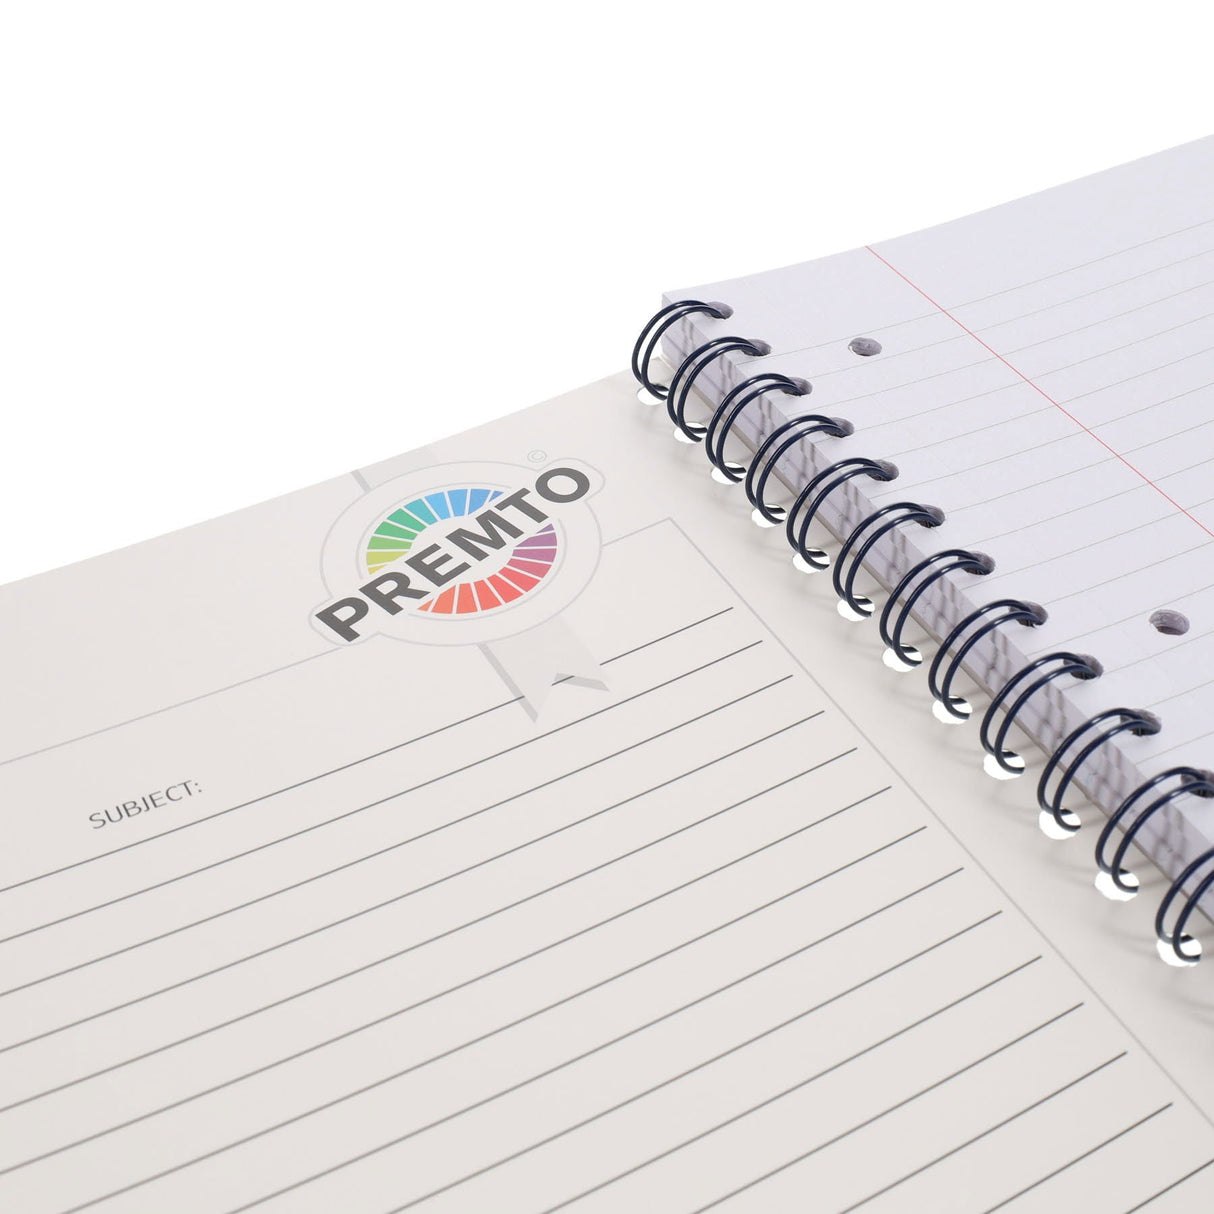 Premto A4 Wiro Notebook PP - 200 Pages - Caterpillar Green | Stationery Shop UK